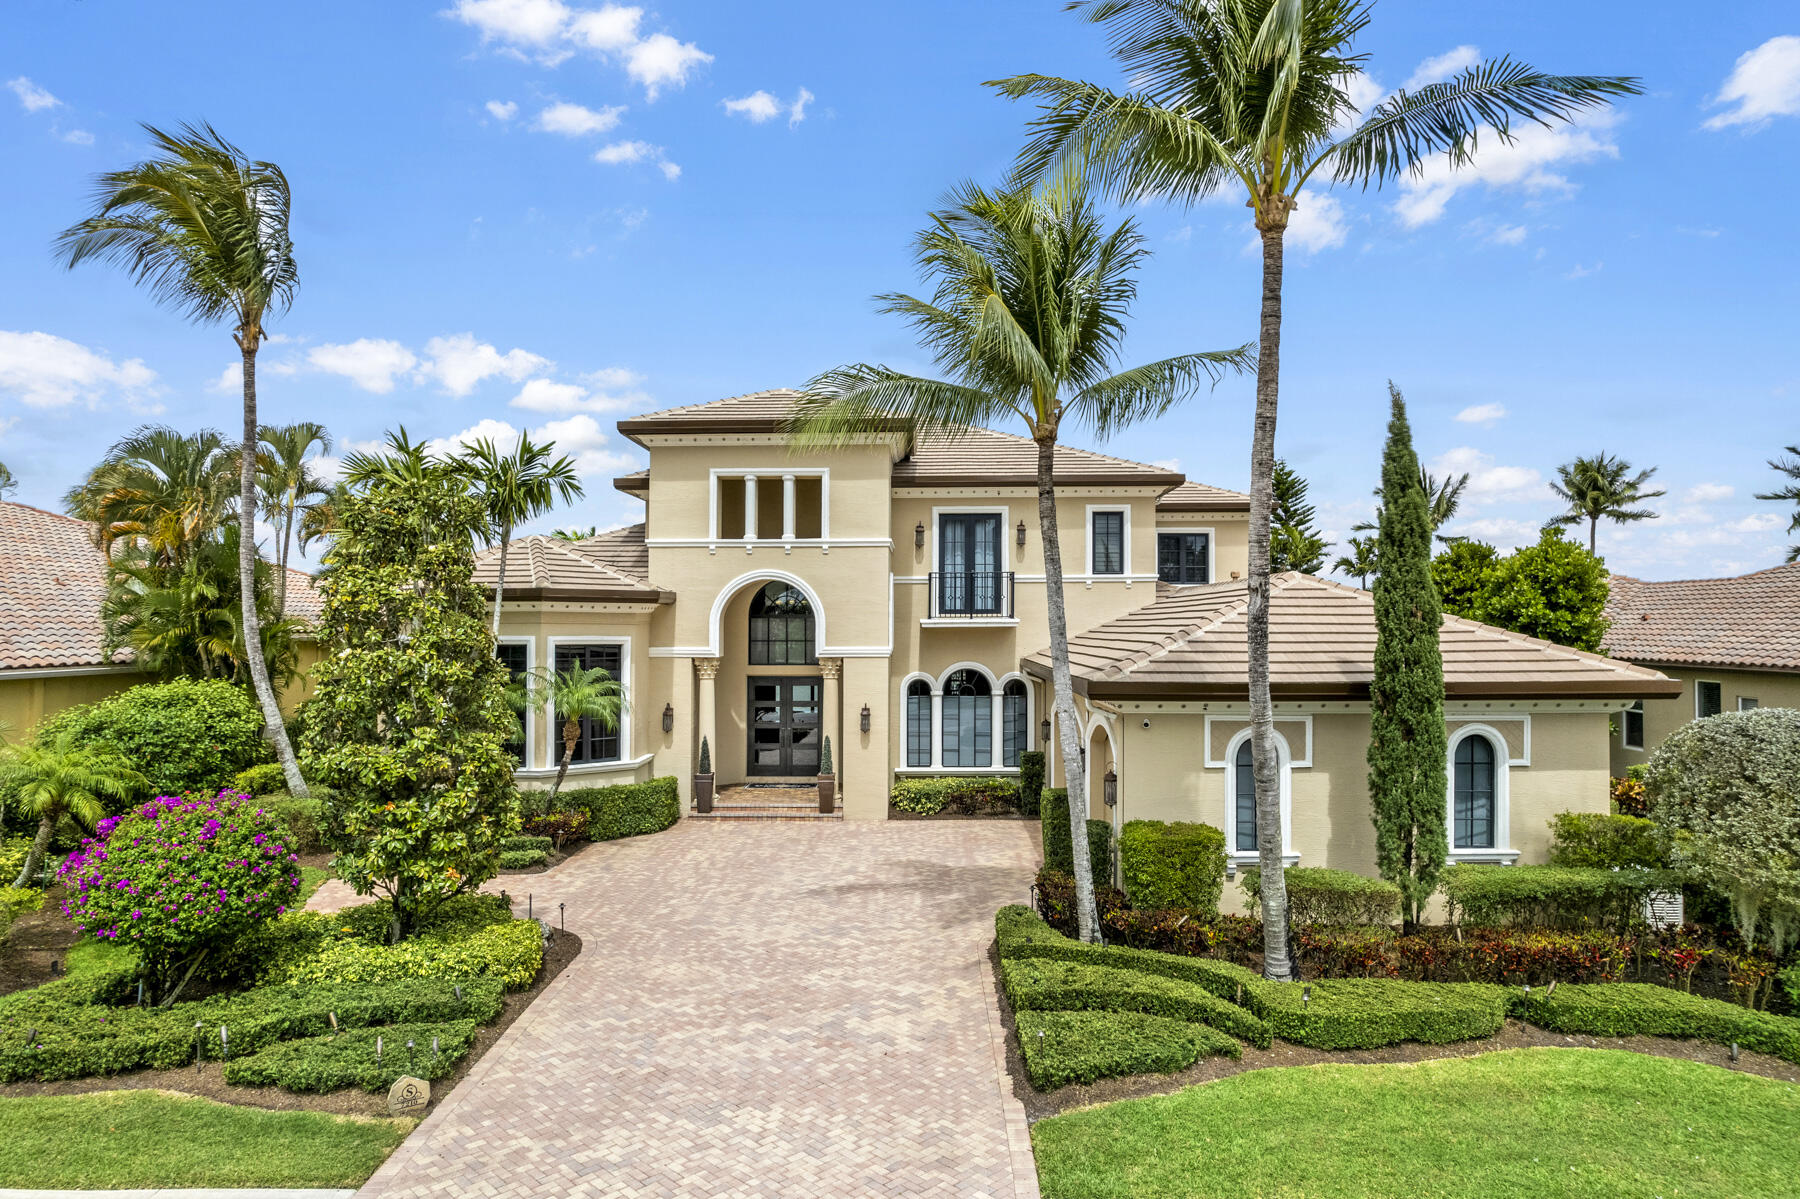 7210 Winding Bay Lane, West Palm Beach, Palm Beach County, Florida - 5 Bedrooms  
6.5 Bathrooms - 